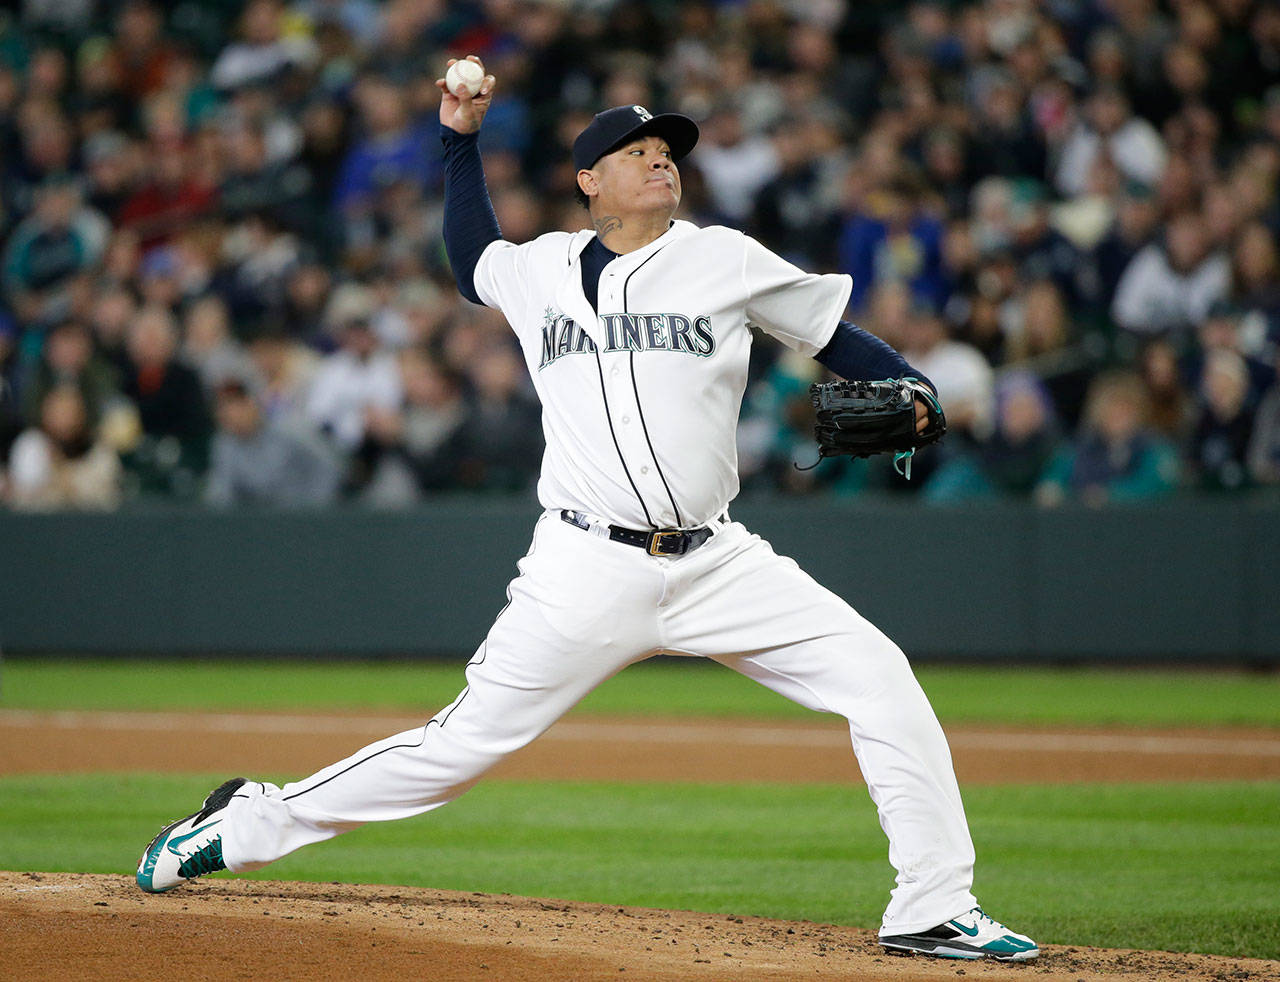 Mariners starting pitcher Felix Hernandez in action against the Marlins on April 19, 2017, in Seattle. (AP Photo/Elaine Thompson)